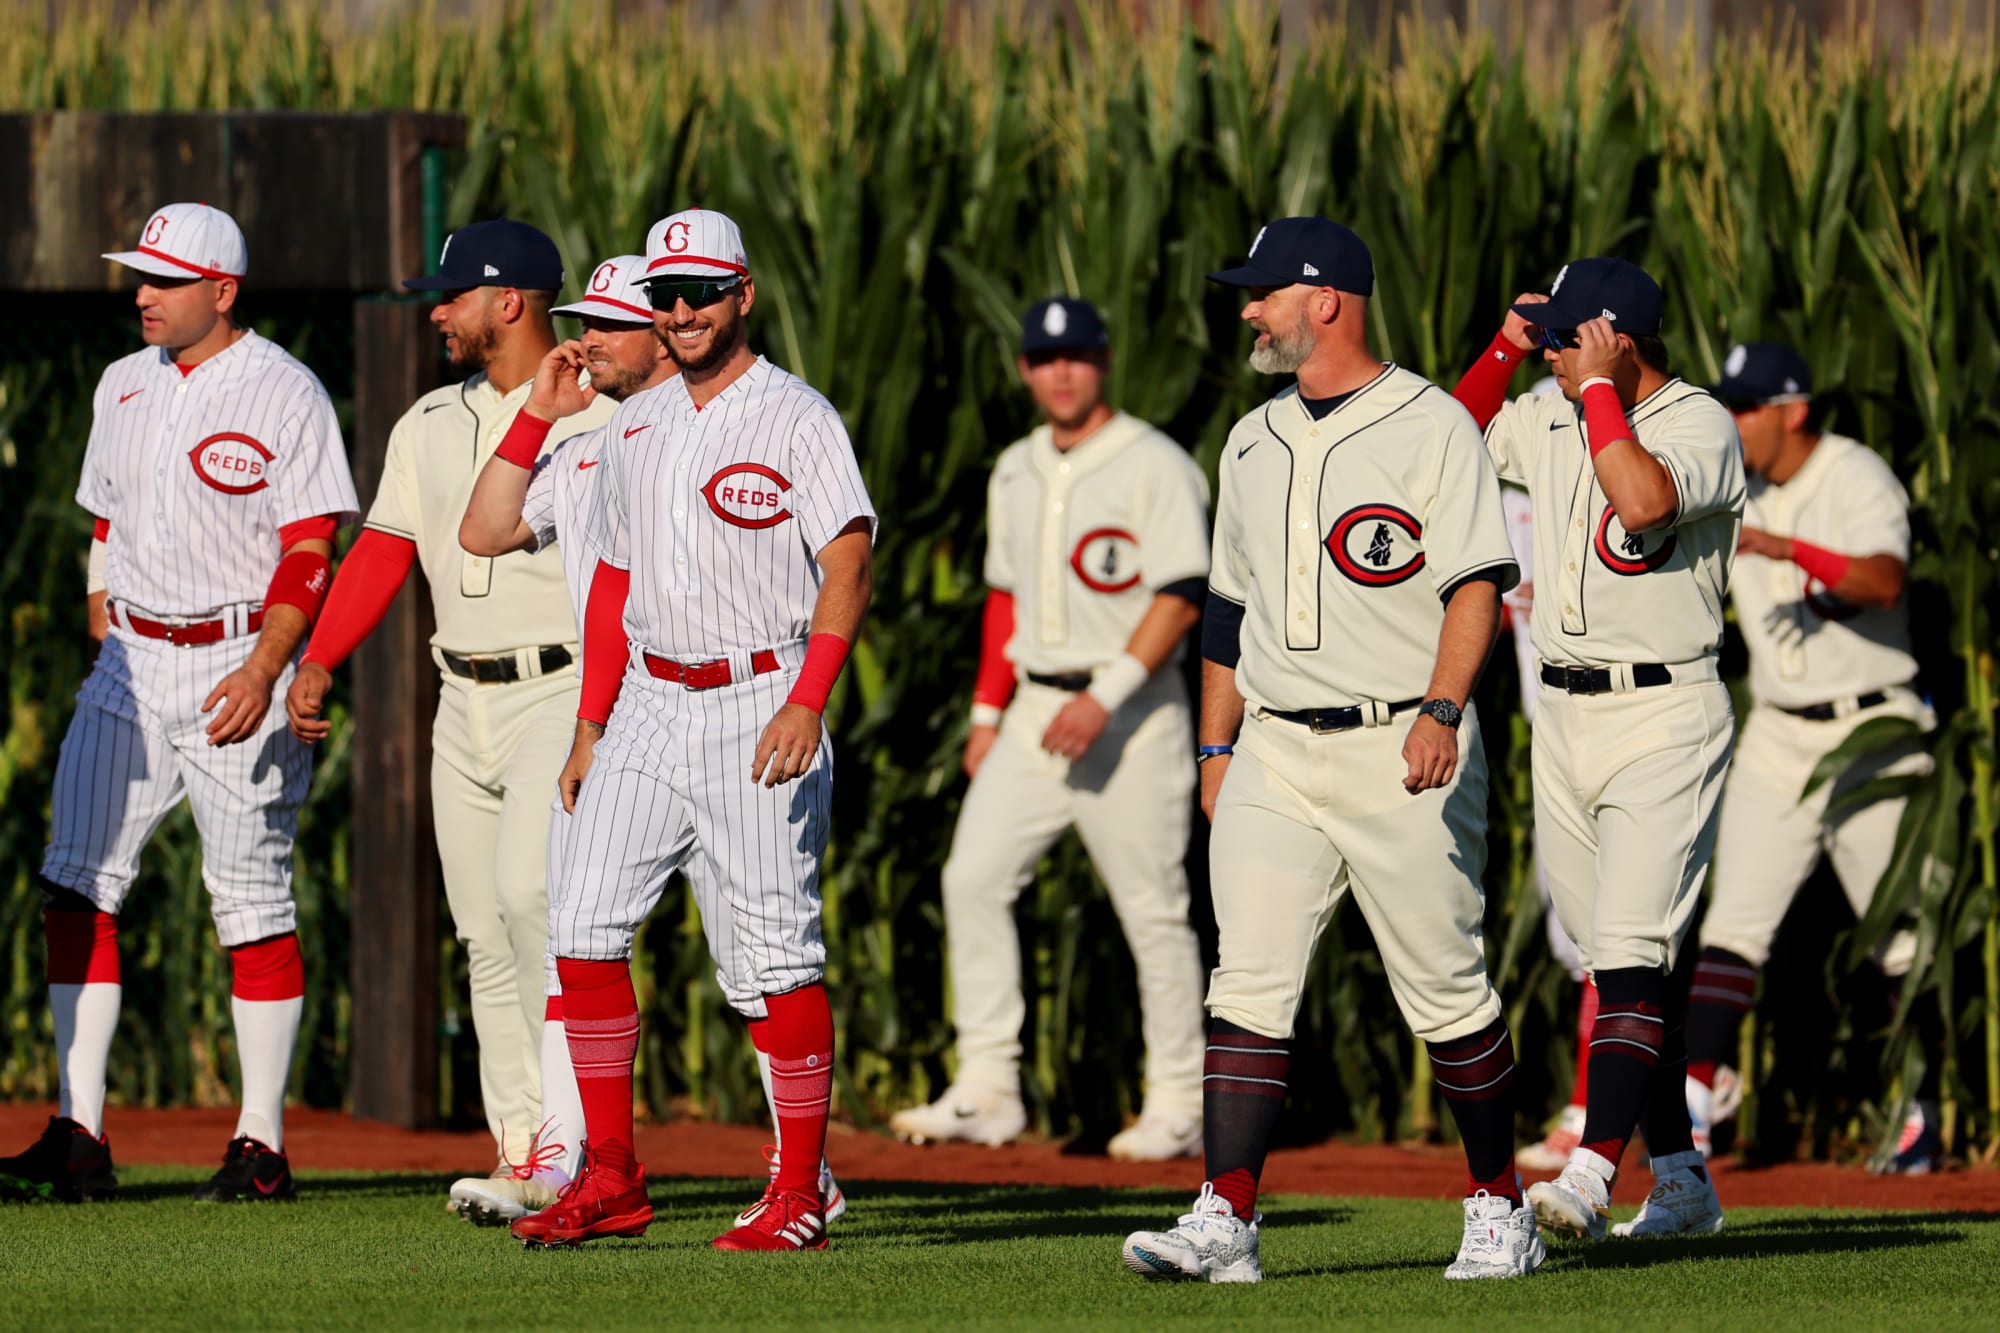 Cubs 'have a catch,' claim a win over Reds in second 'Field of Dreams' game  - Chicago Sun-Times